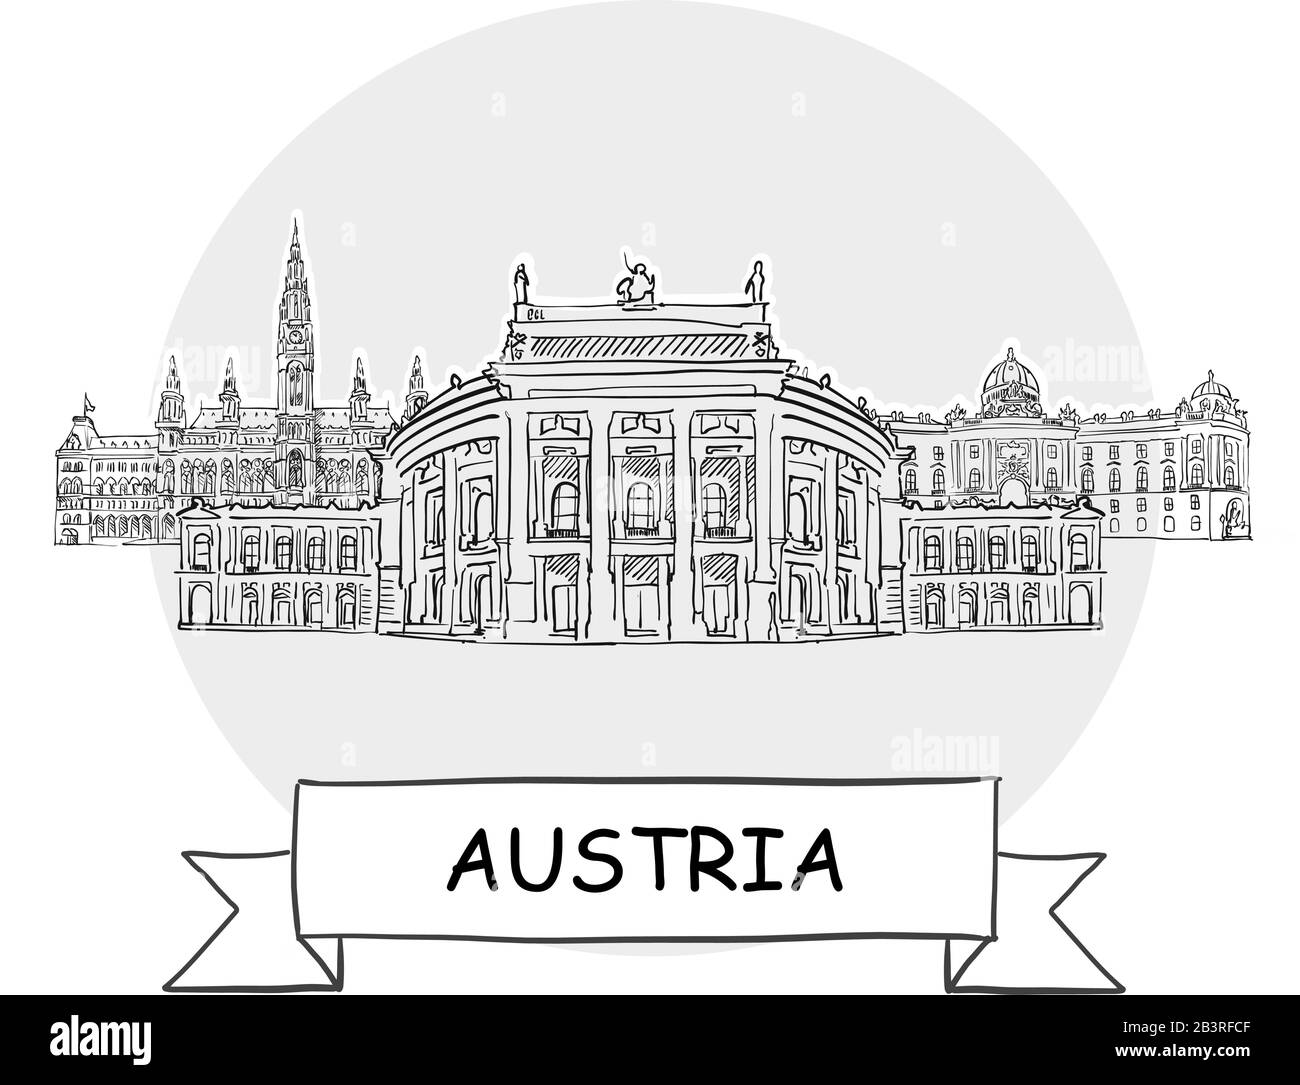 Austria Hand-Drawn Urban Vector Sign. Black Line Art Illustration with Ribbon and Title. Stock Vector